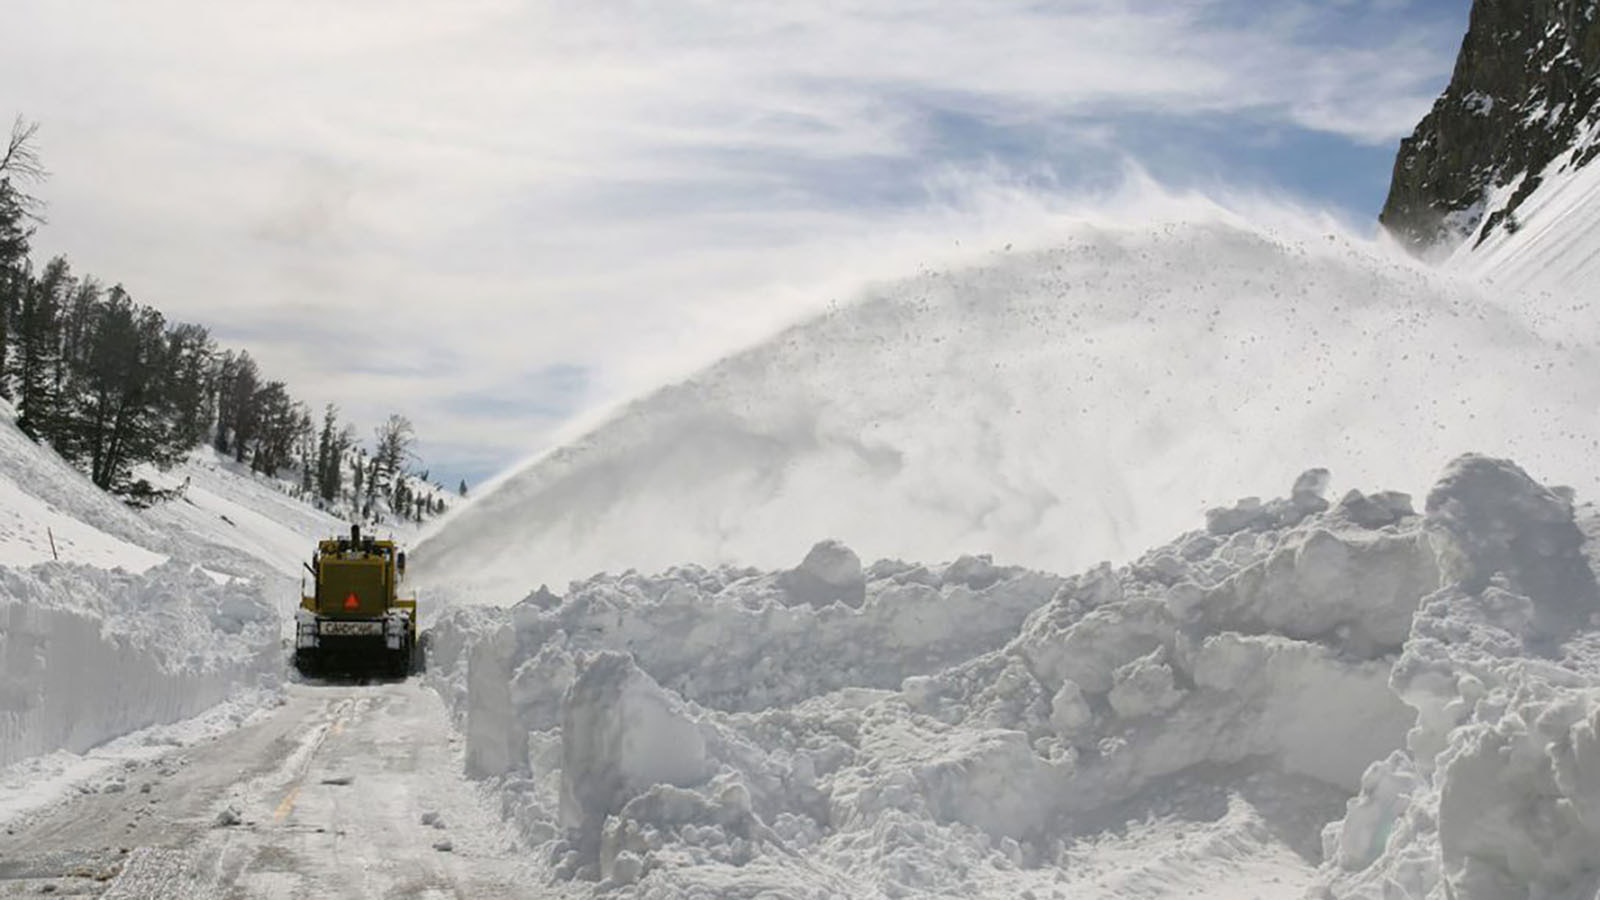 Plowing through the snowpack on National Park Service roads is one sign of spring in Wyoming.